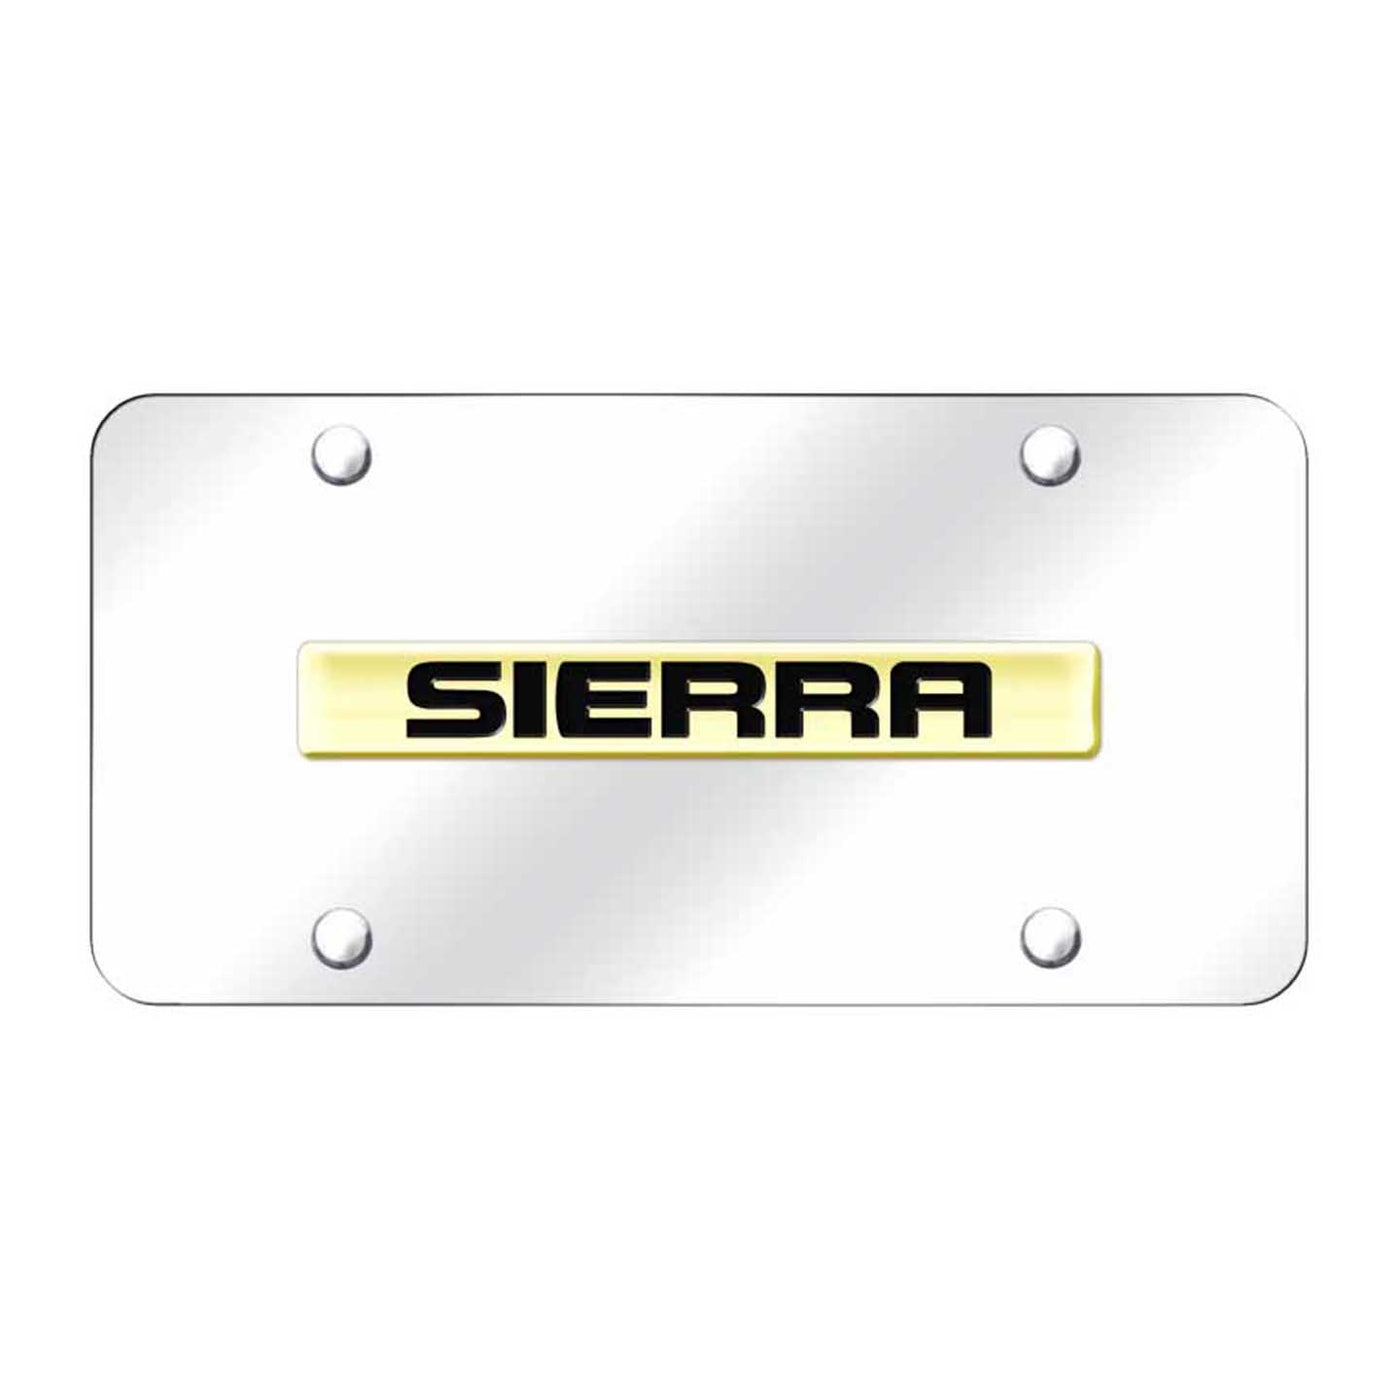 Sierra Name License Plate - Gold on Mirrored